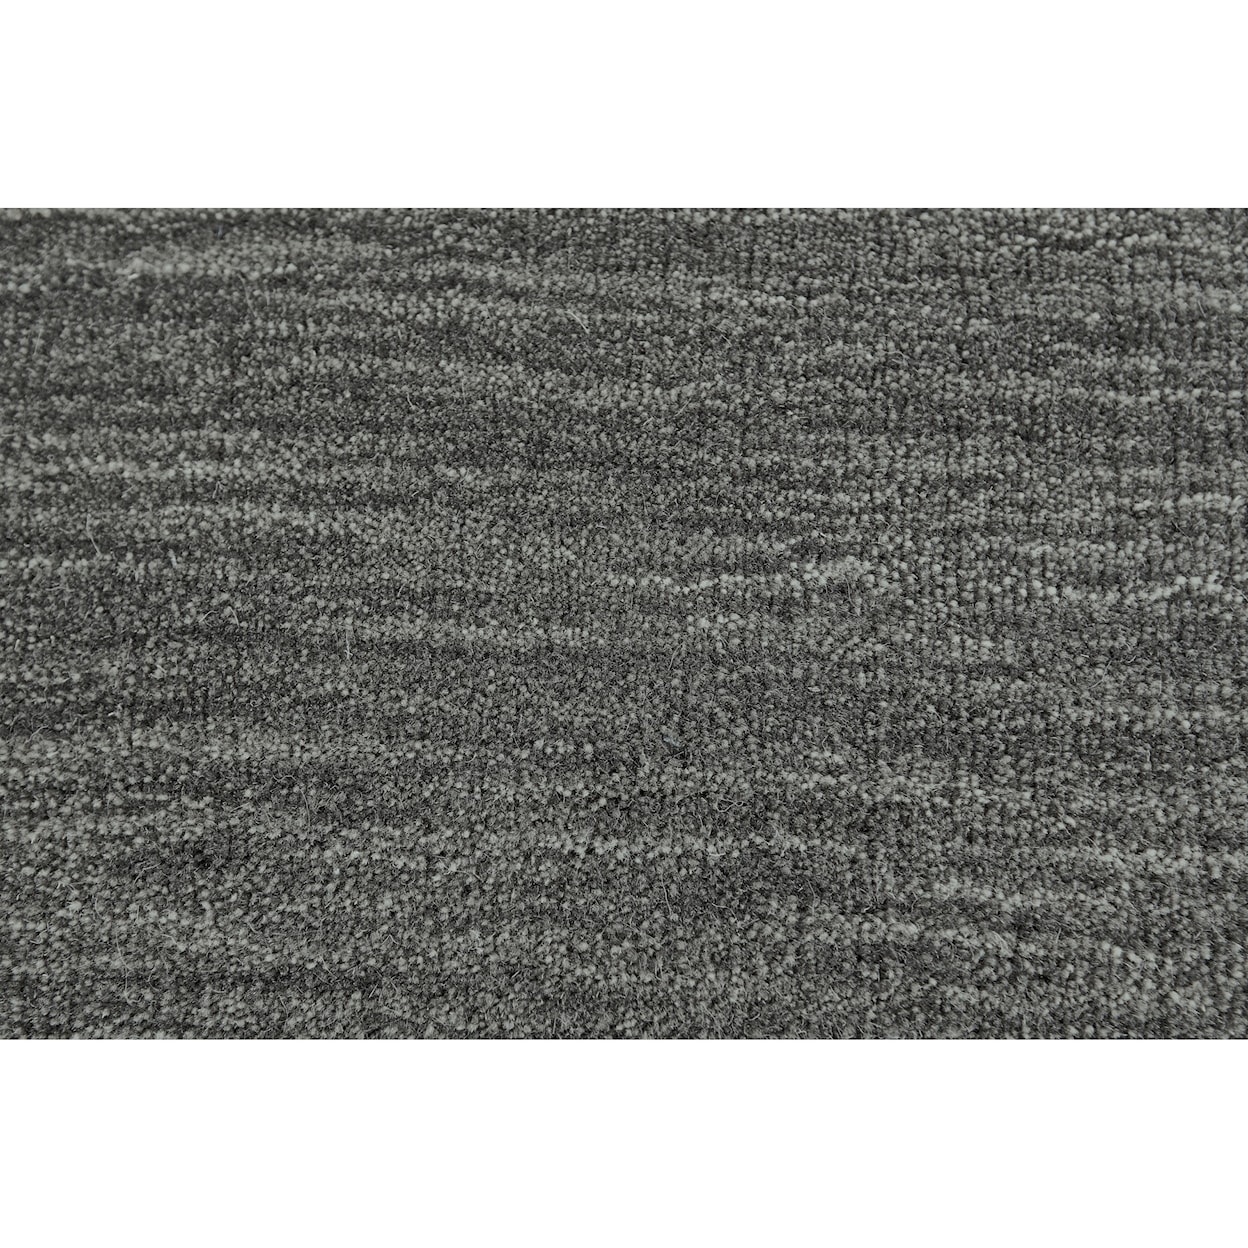 Feizy Rugs Luna Charcoal 8' X 11' Area Rug